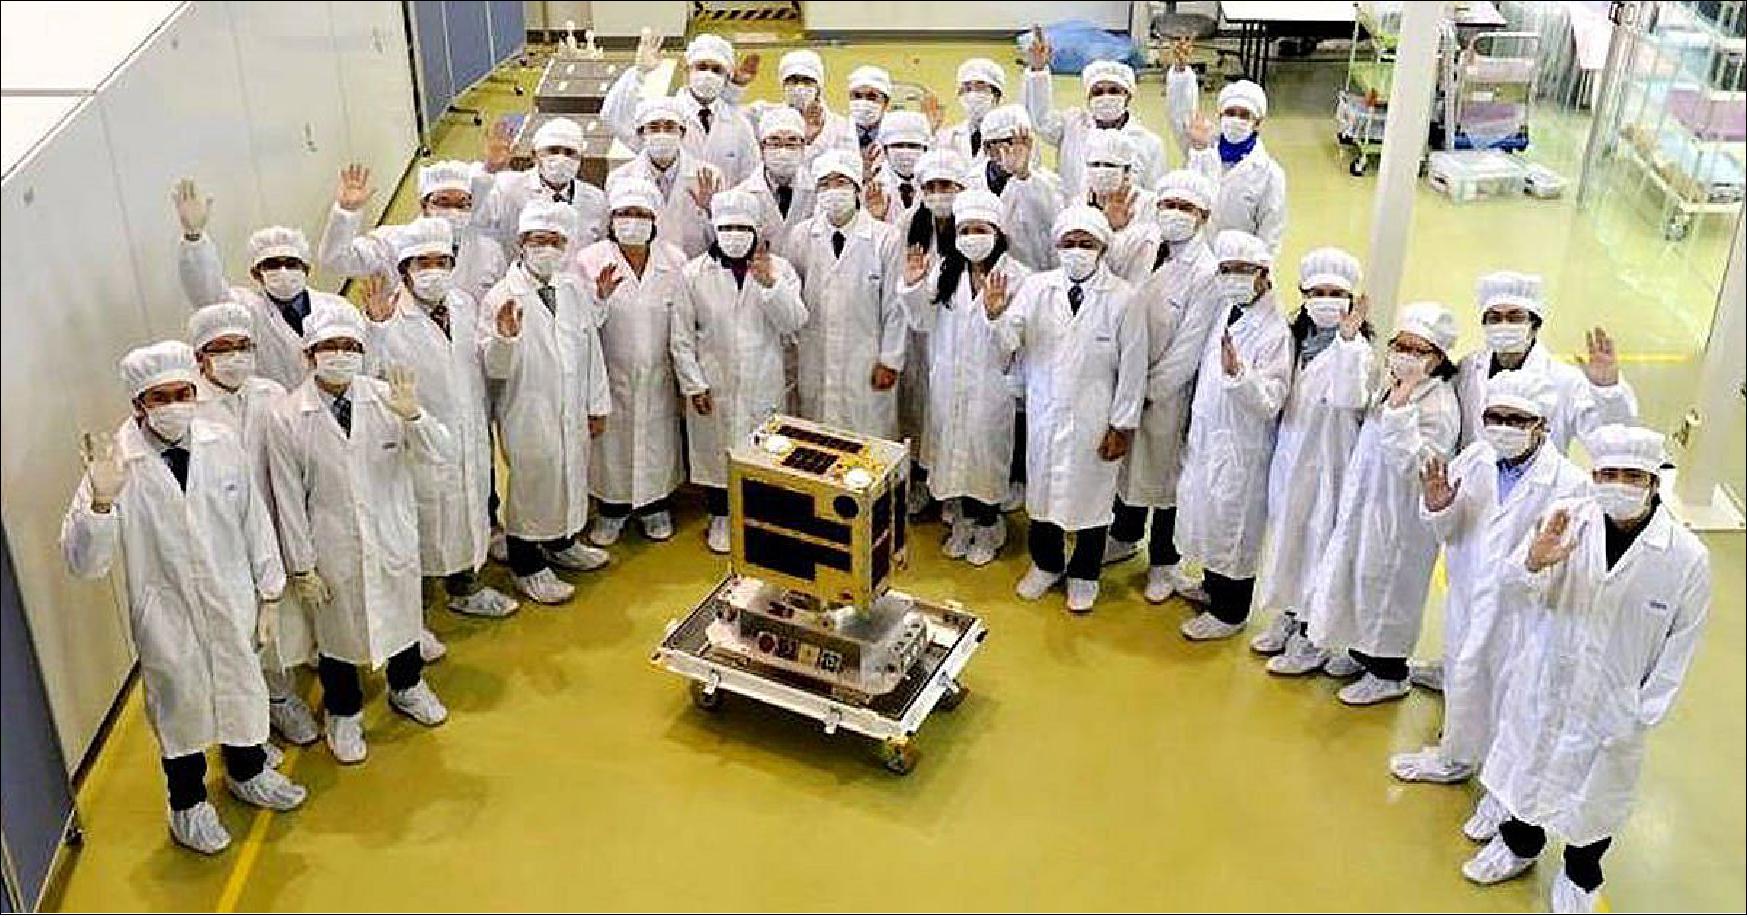 Figure 5: On January 13, 2016, the Diwata-1 microsatellite was turned over to JAXA at the Tsukuba Space Center by the Philippine and Japanese Teams (image credit: JAXA, DOST) 6)